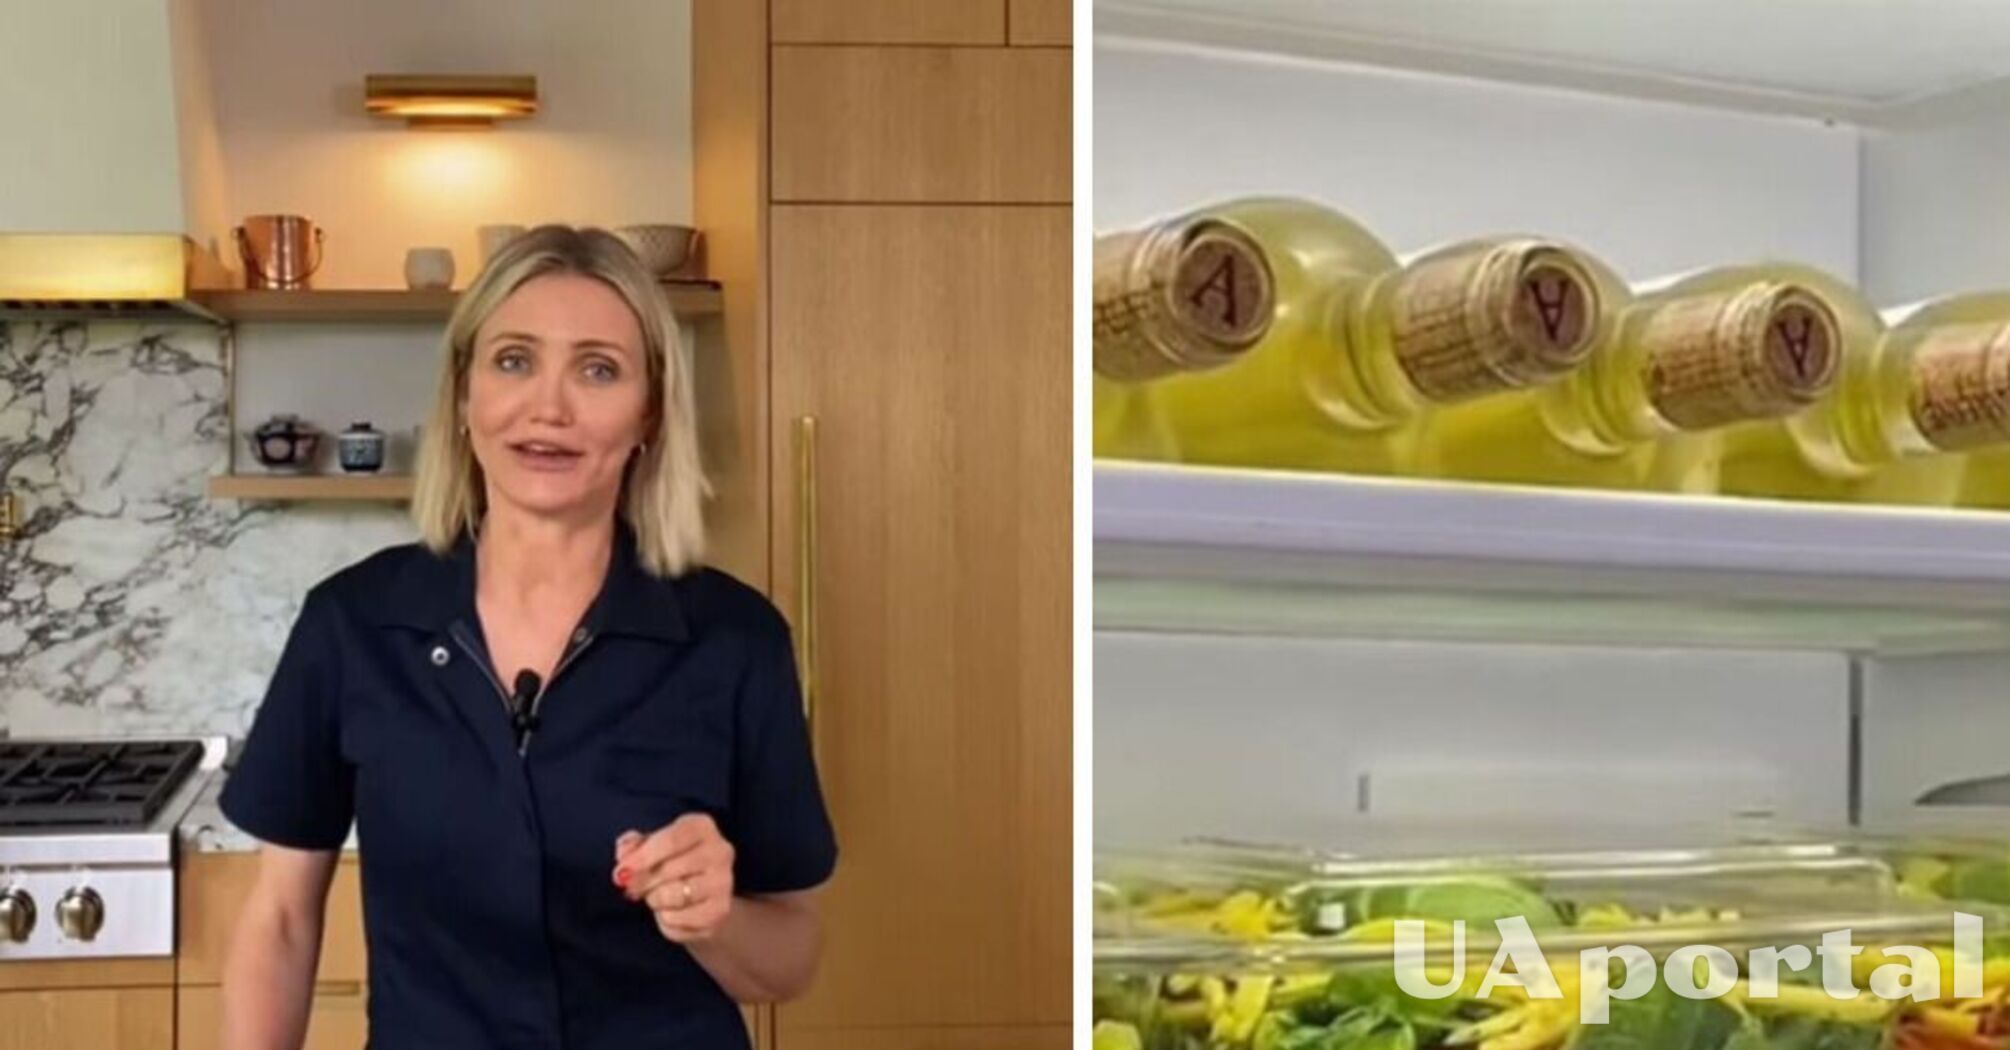 Cameron Diaz was hated after a video with the contents of her fridge: how the actress angered fans